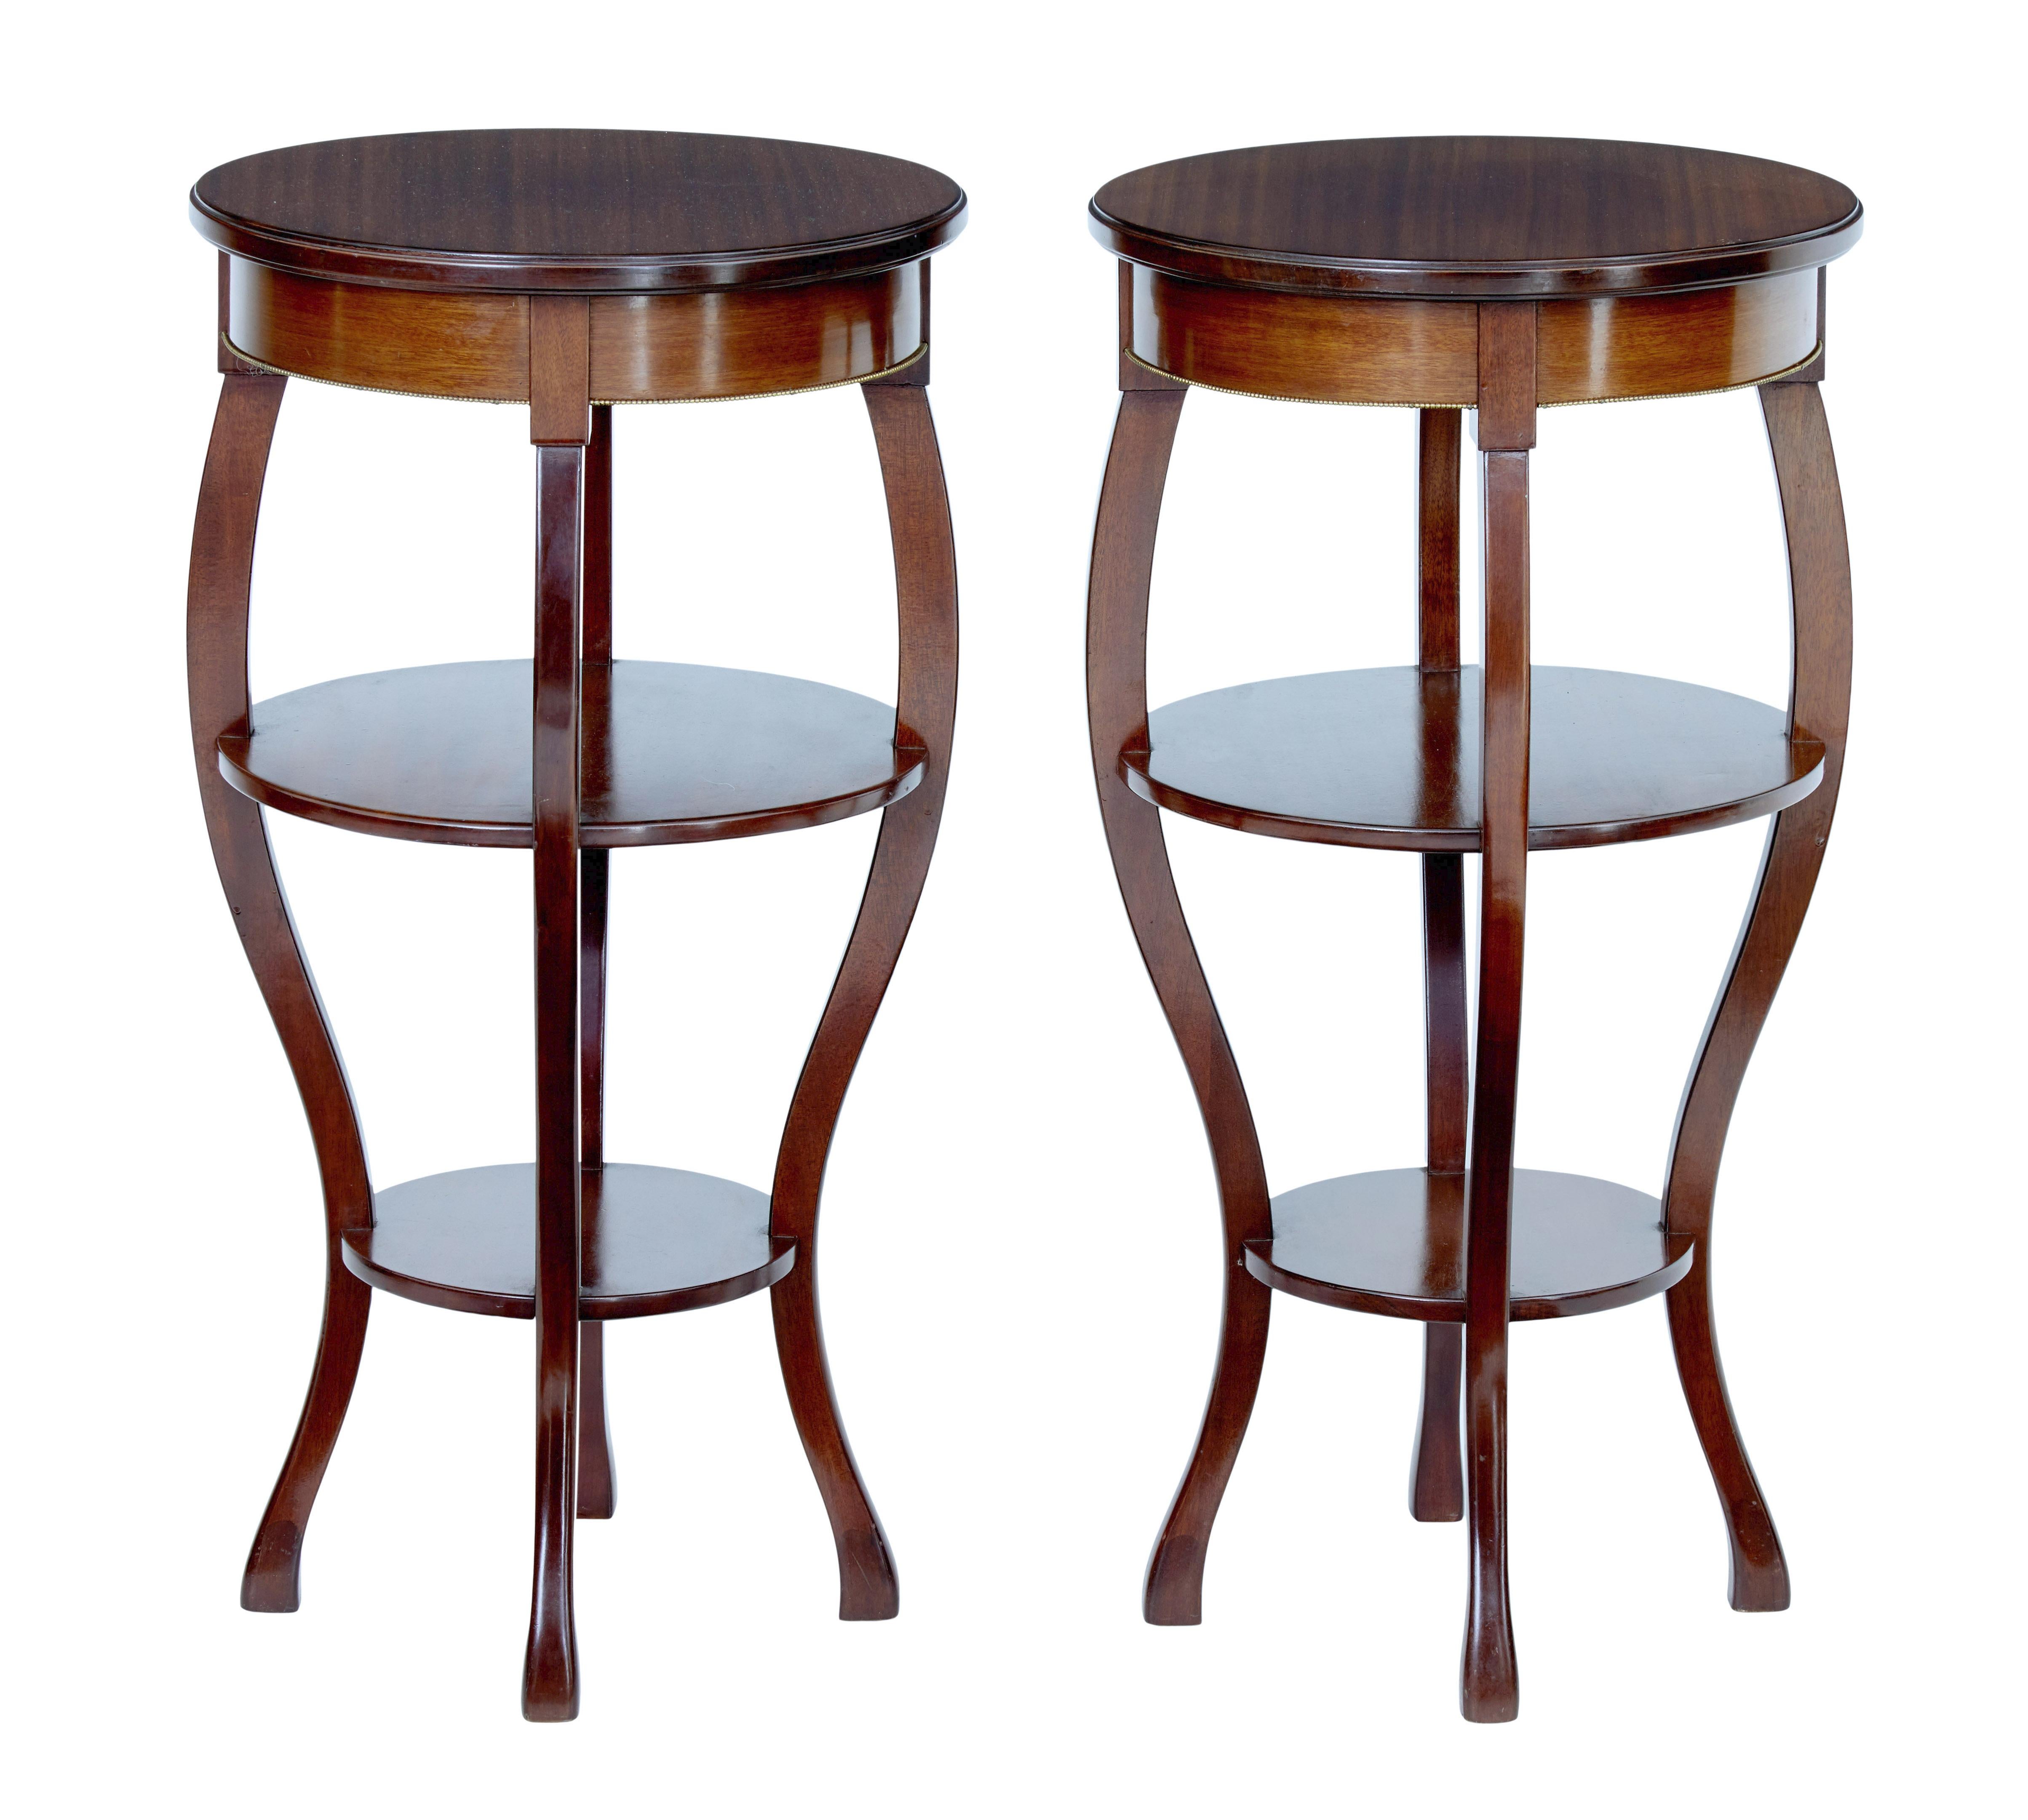 Good quality pair of occasional tables, circa 1950.

Made in mahogany and very much in the Empire taste. Circular tops with brass beading detail to the frieze. Standing on 4 sabre legs with a further 2 circular shelves supported between the